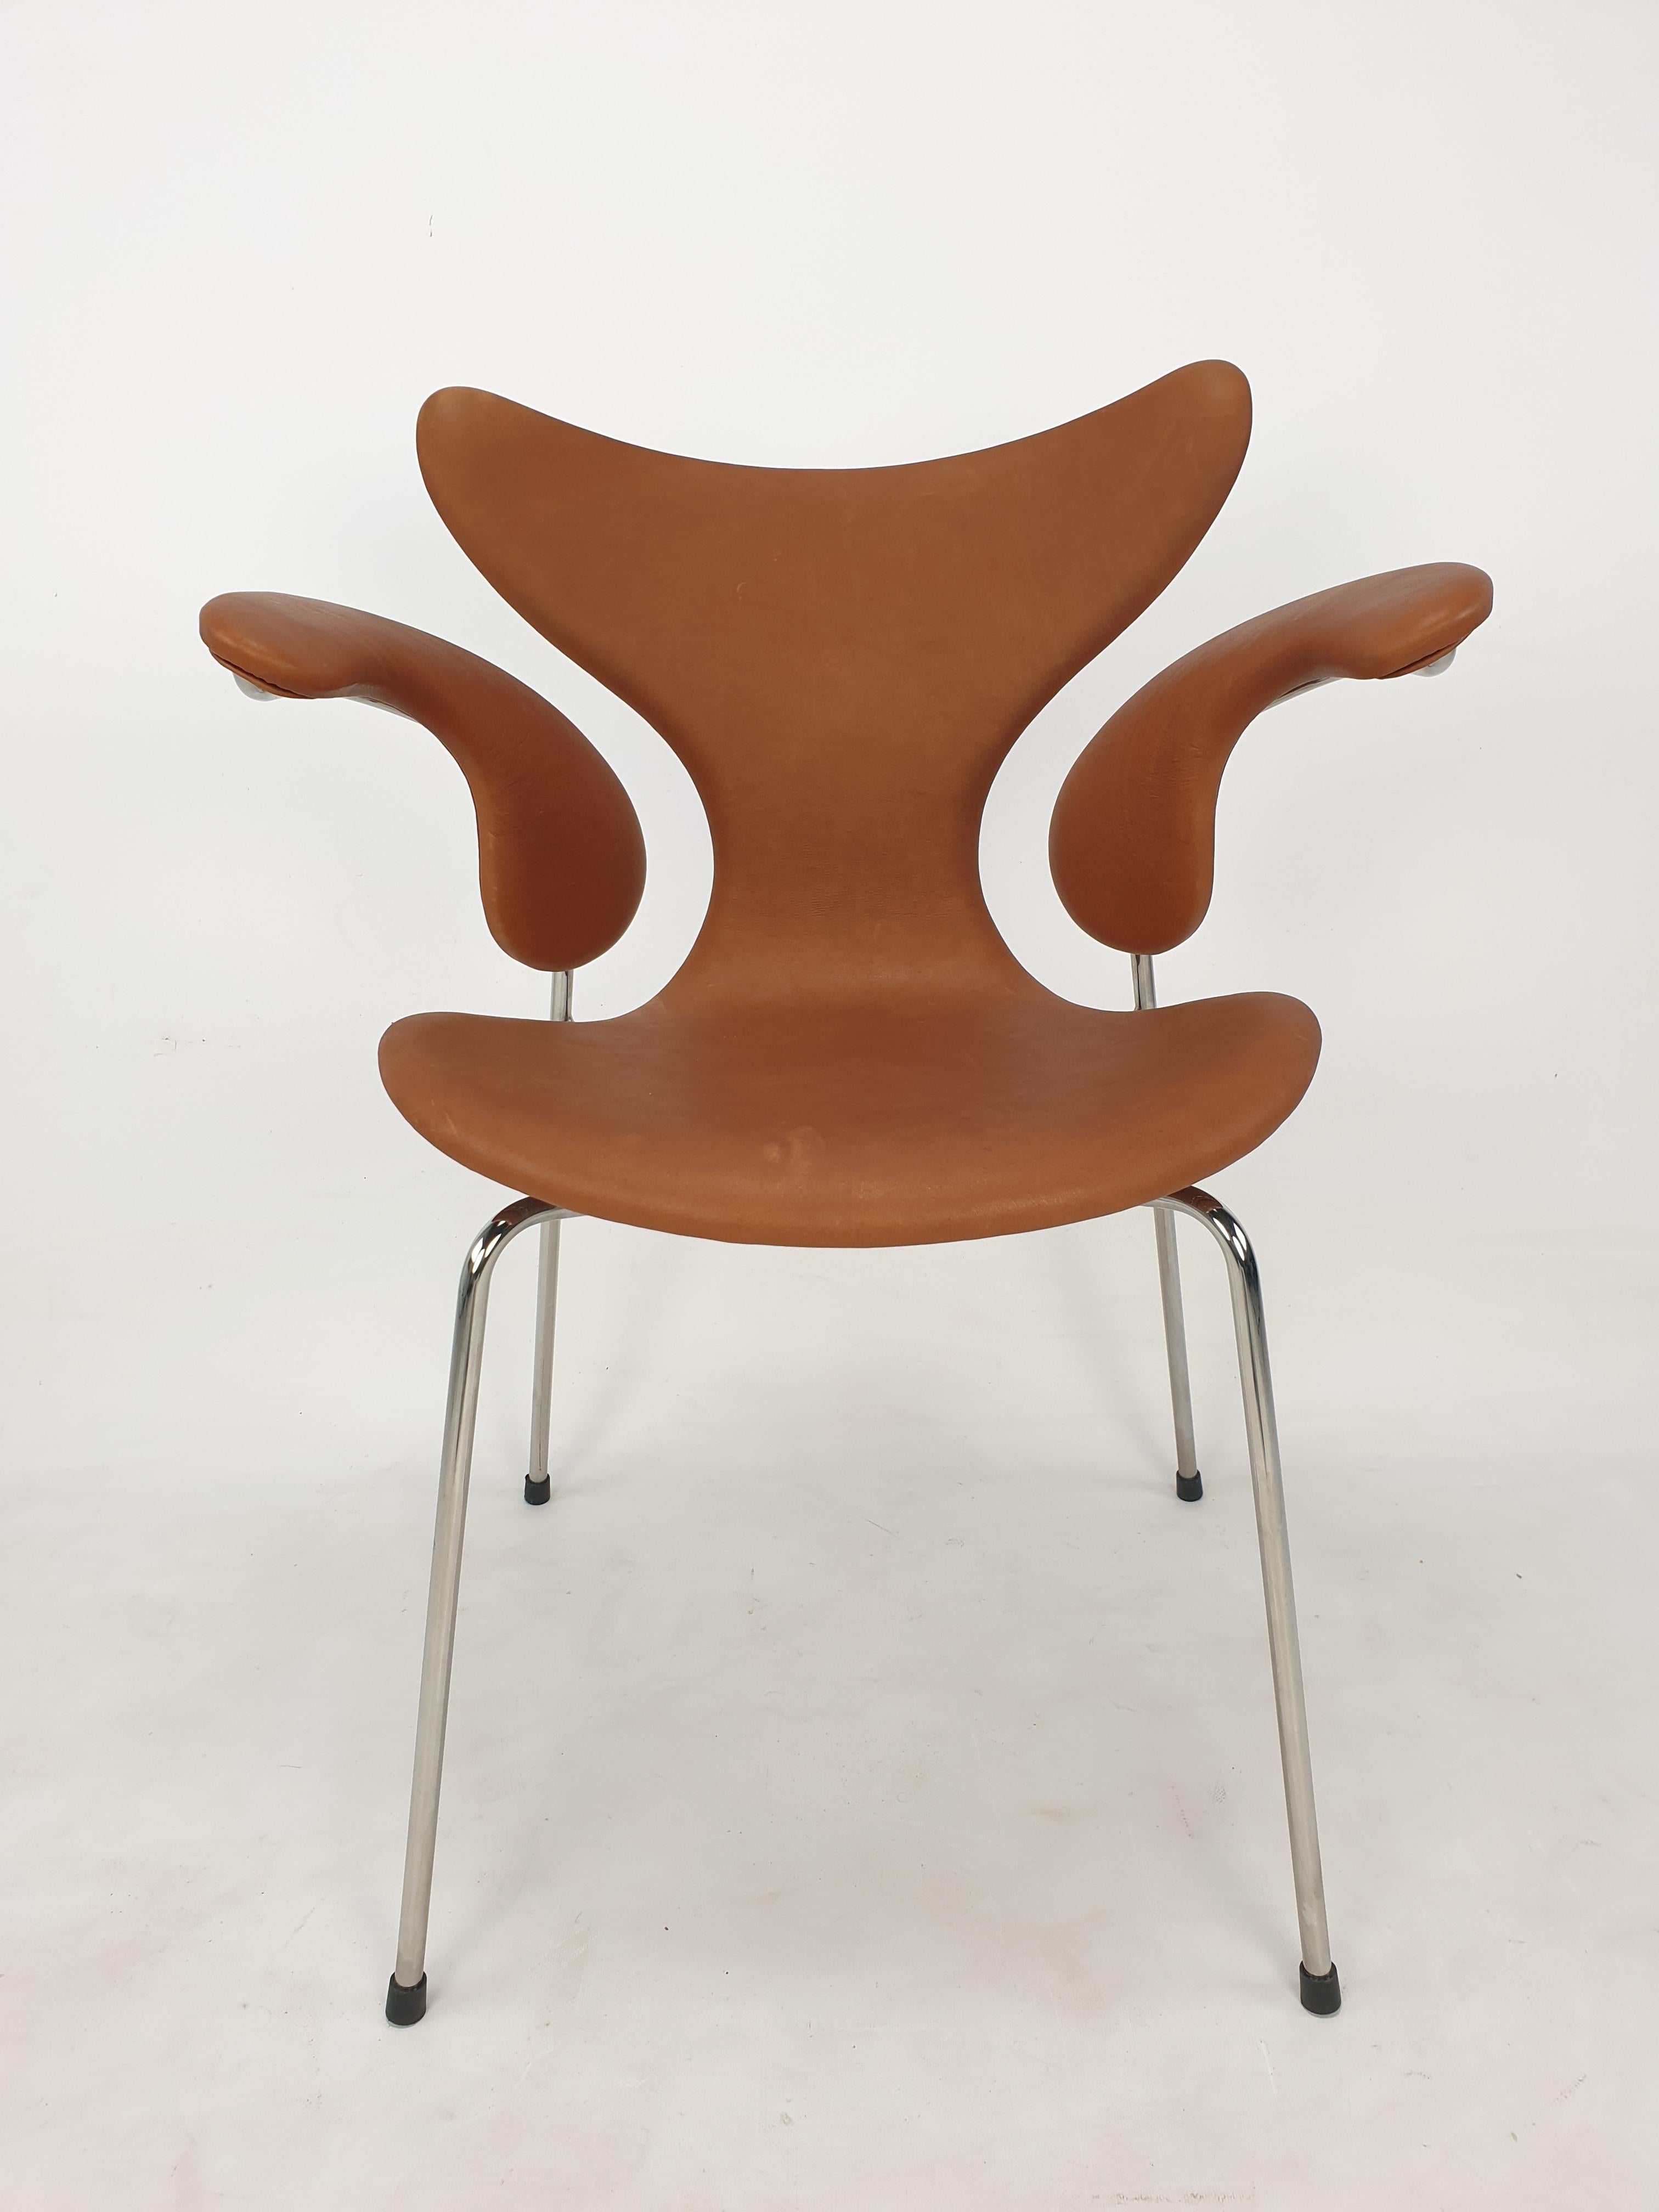 Rare original Arne Jacobsen armchair named and known as 